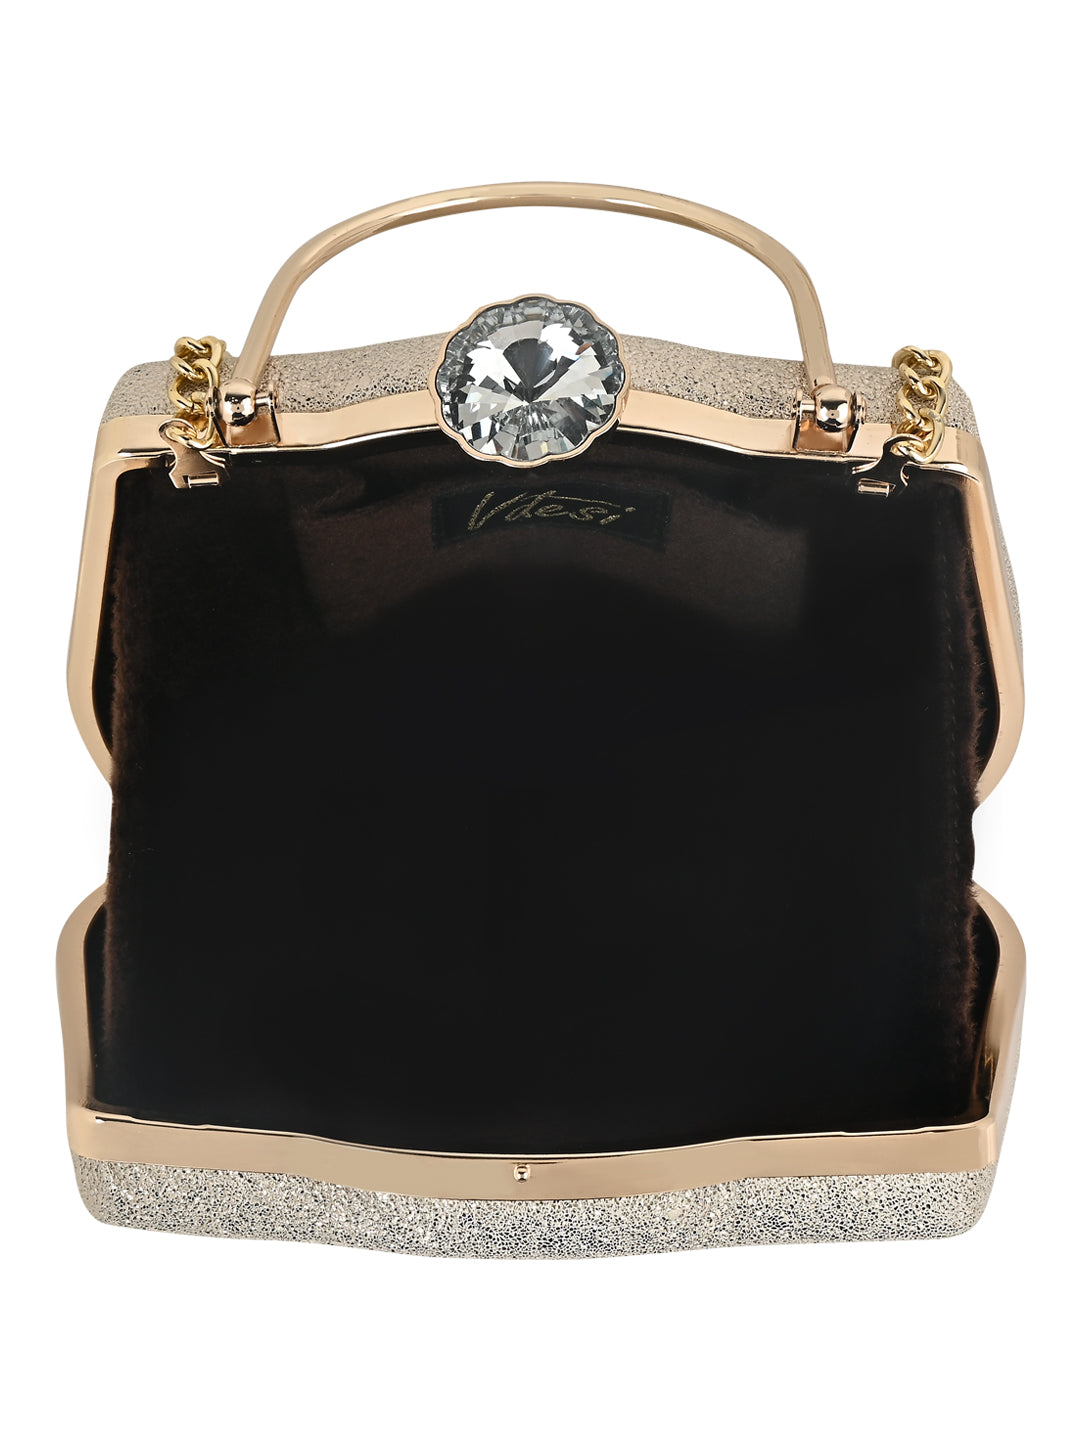 A shiny surface Vdesi clutch bag with a chain handle.